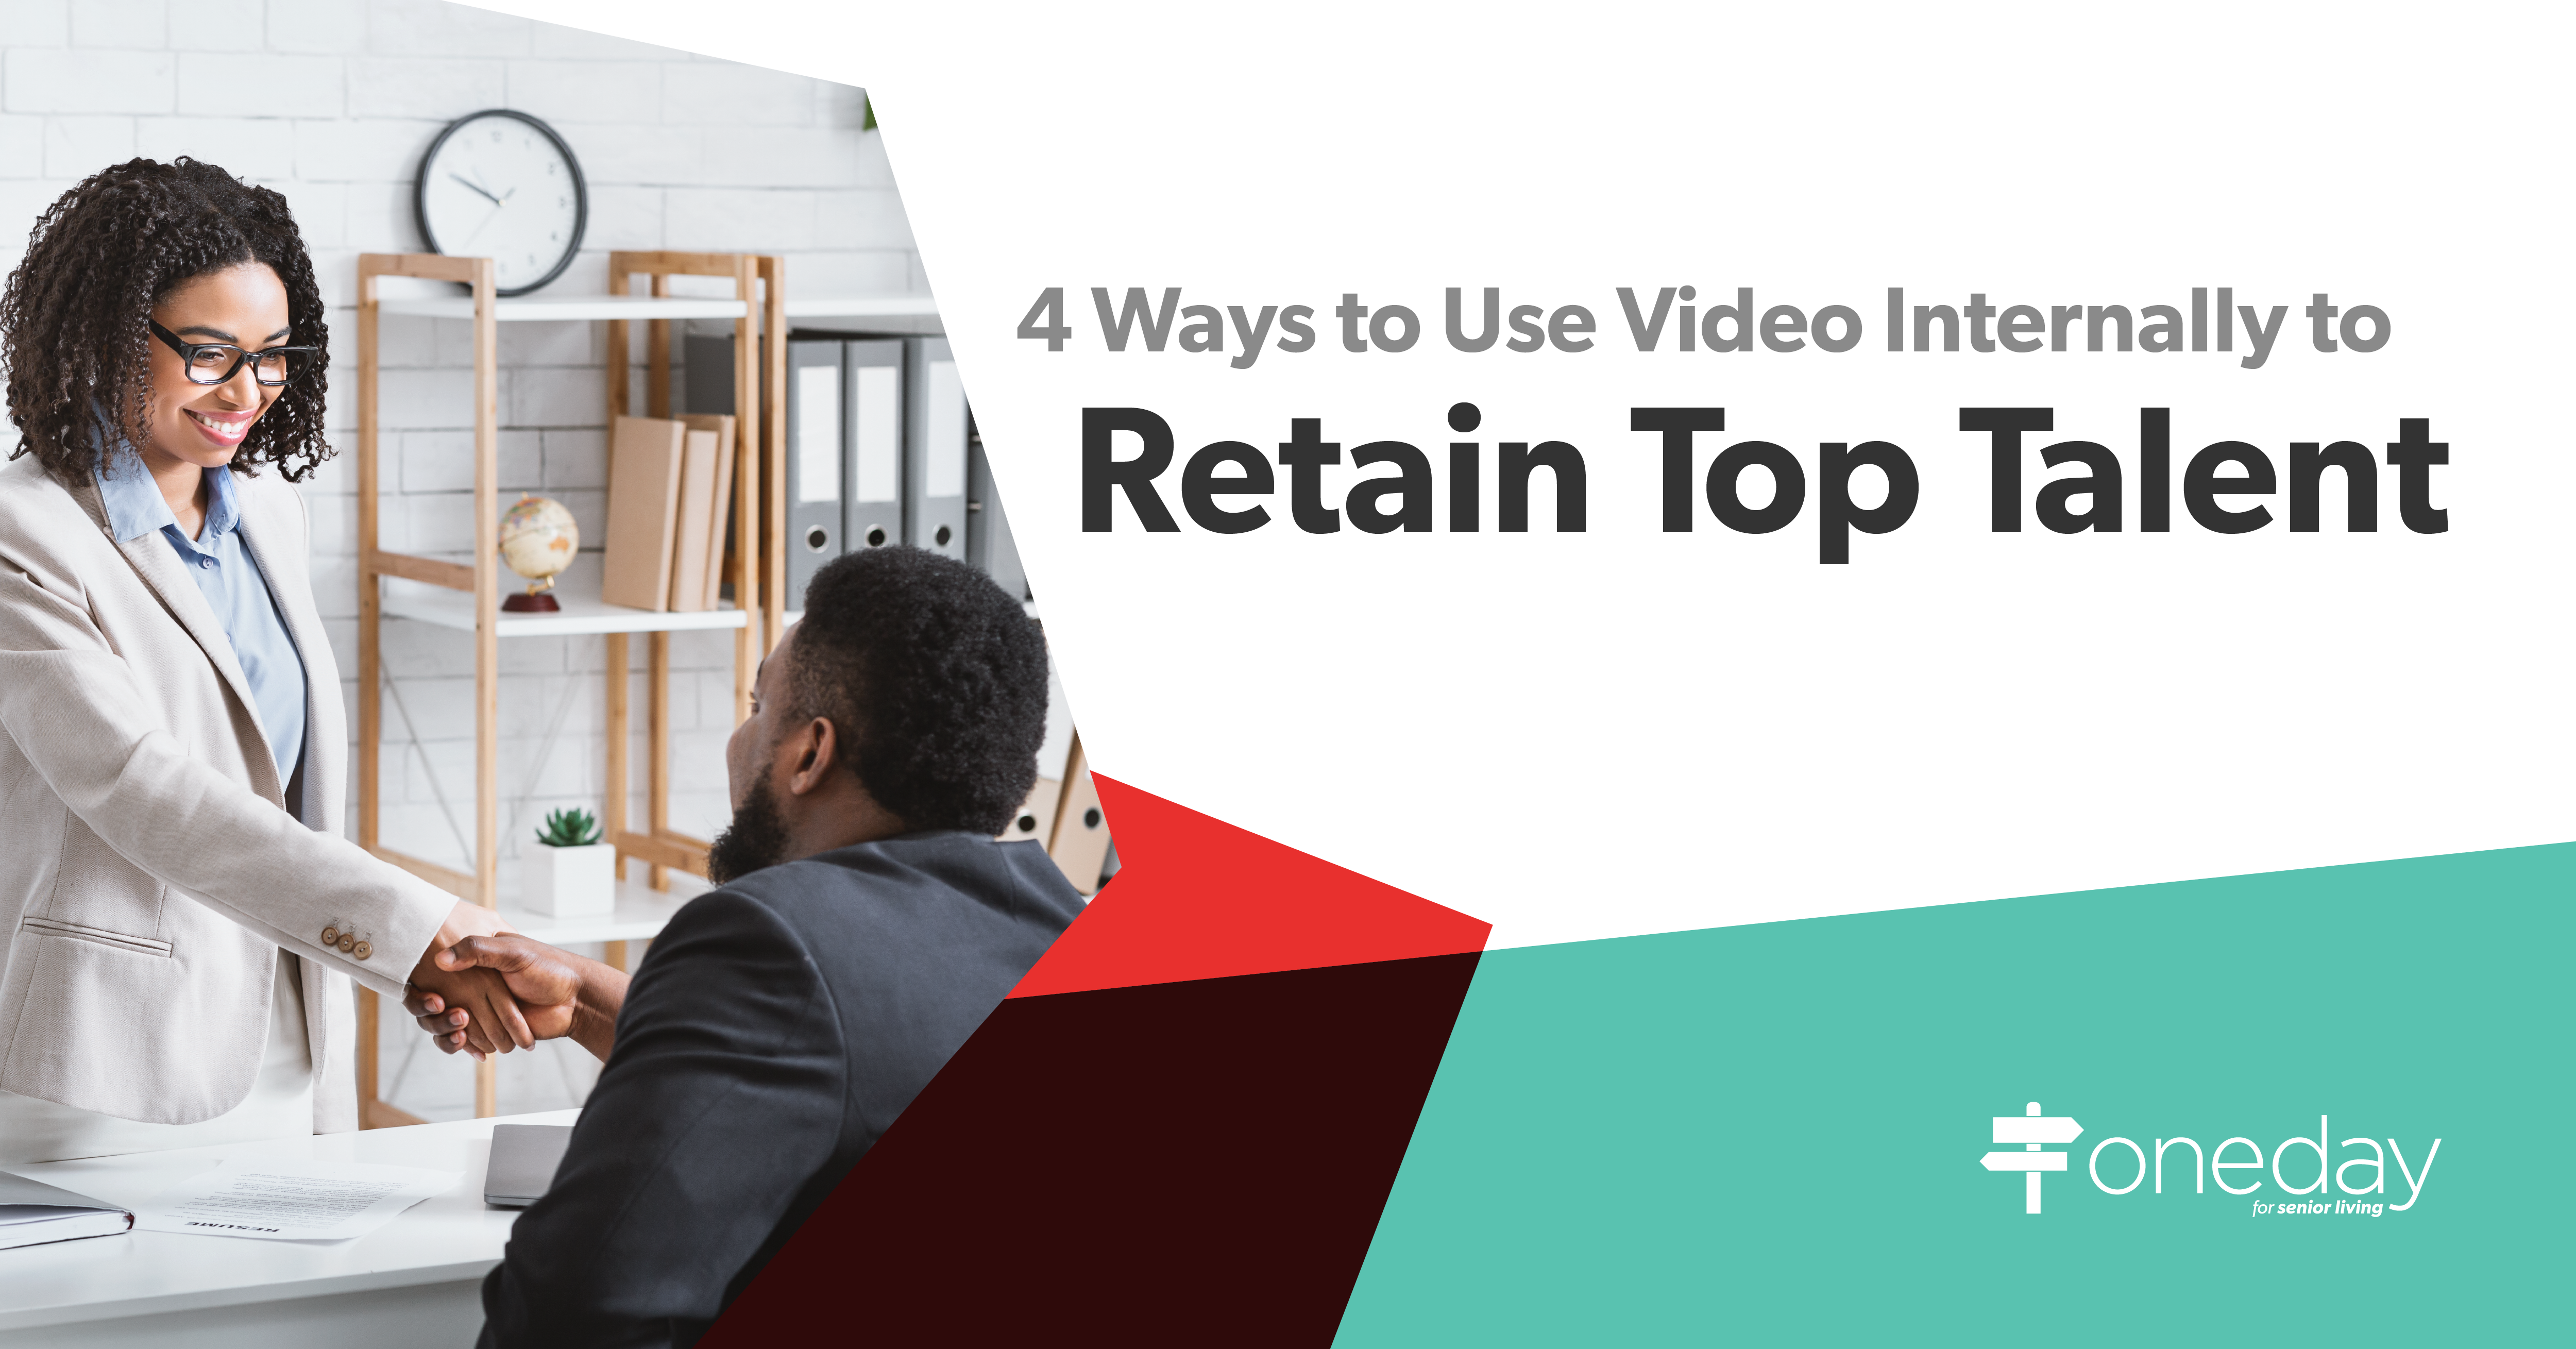 A look at some simple ways senior living communities can use video in their internal operations to keep talent satisfied and maximize employee retention.